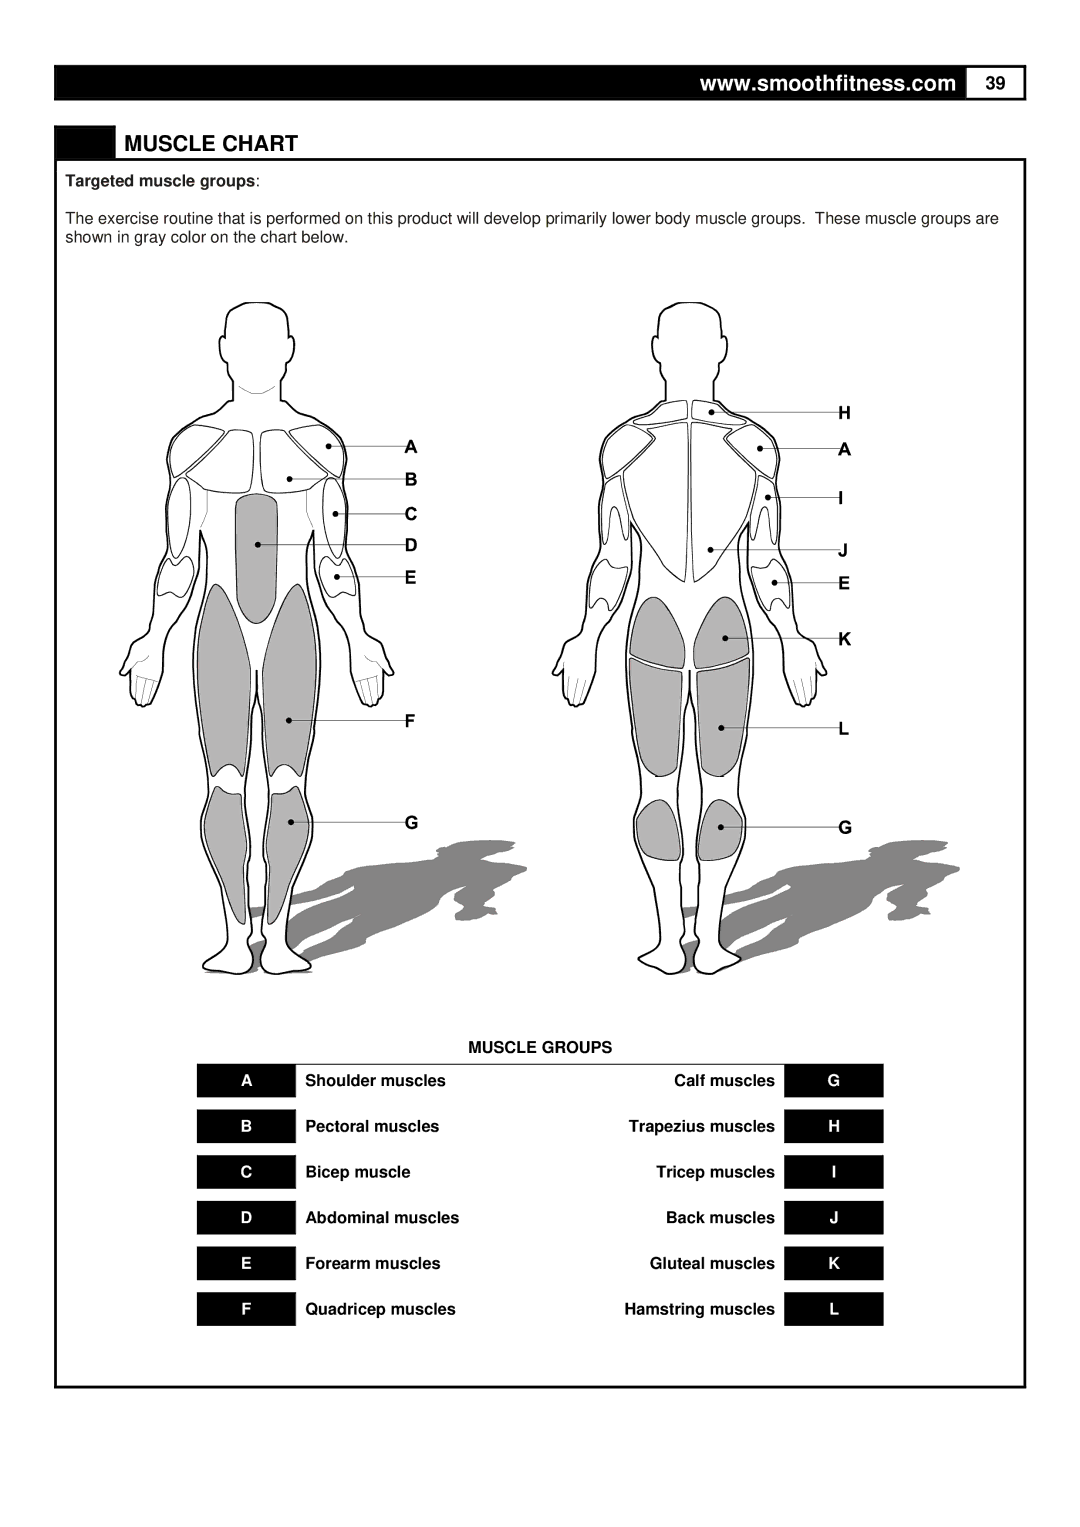 Smooth Fitness 9.45TV user manual Muscle Chart, Targeted muscle groups 